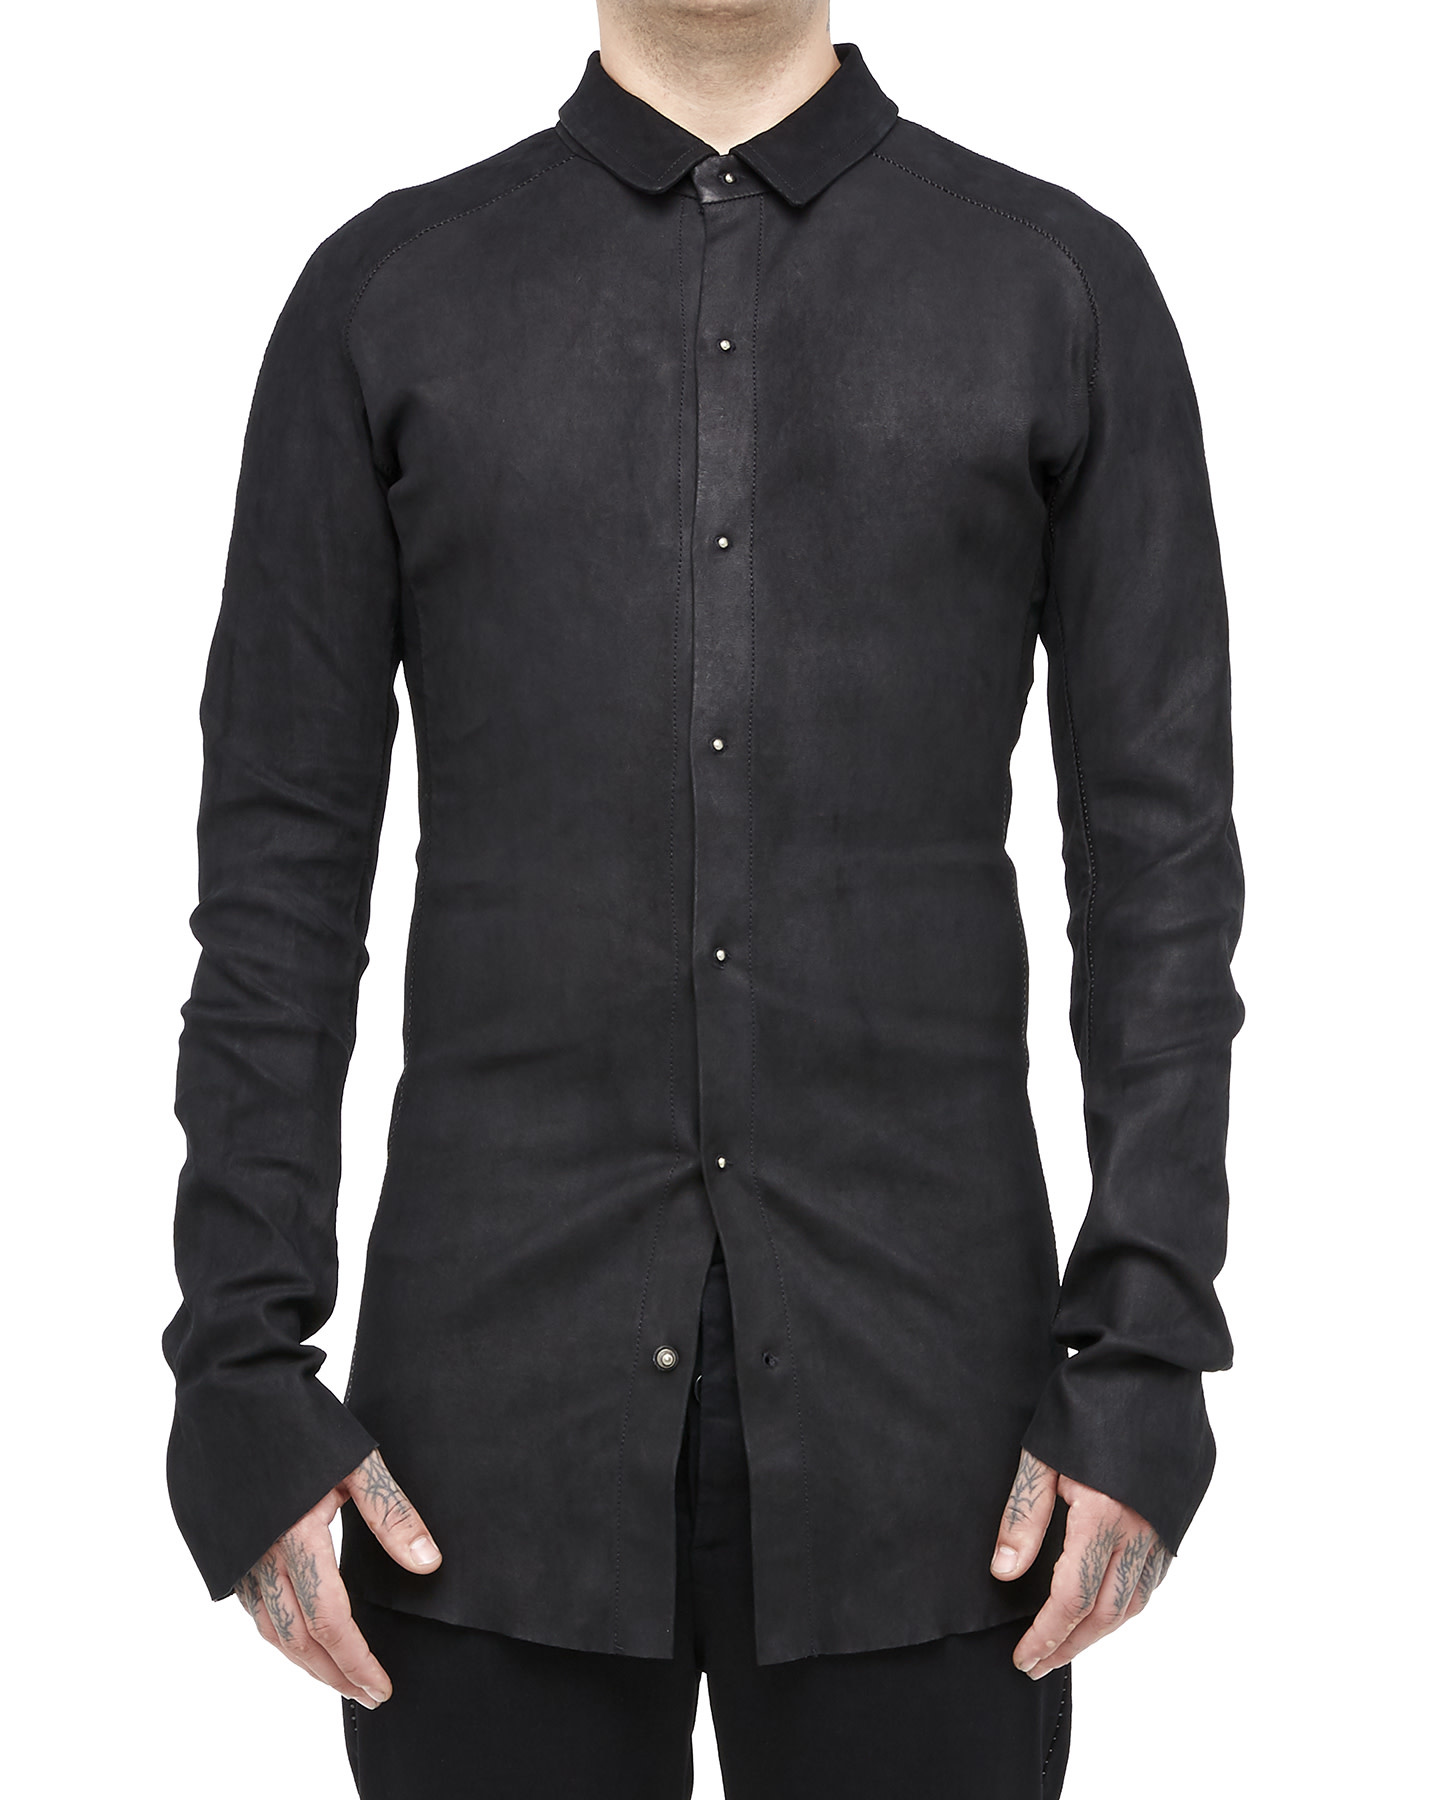 INDISCRET STRETCH LEATHER COLLARED SHIRT - MATTE BLACK